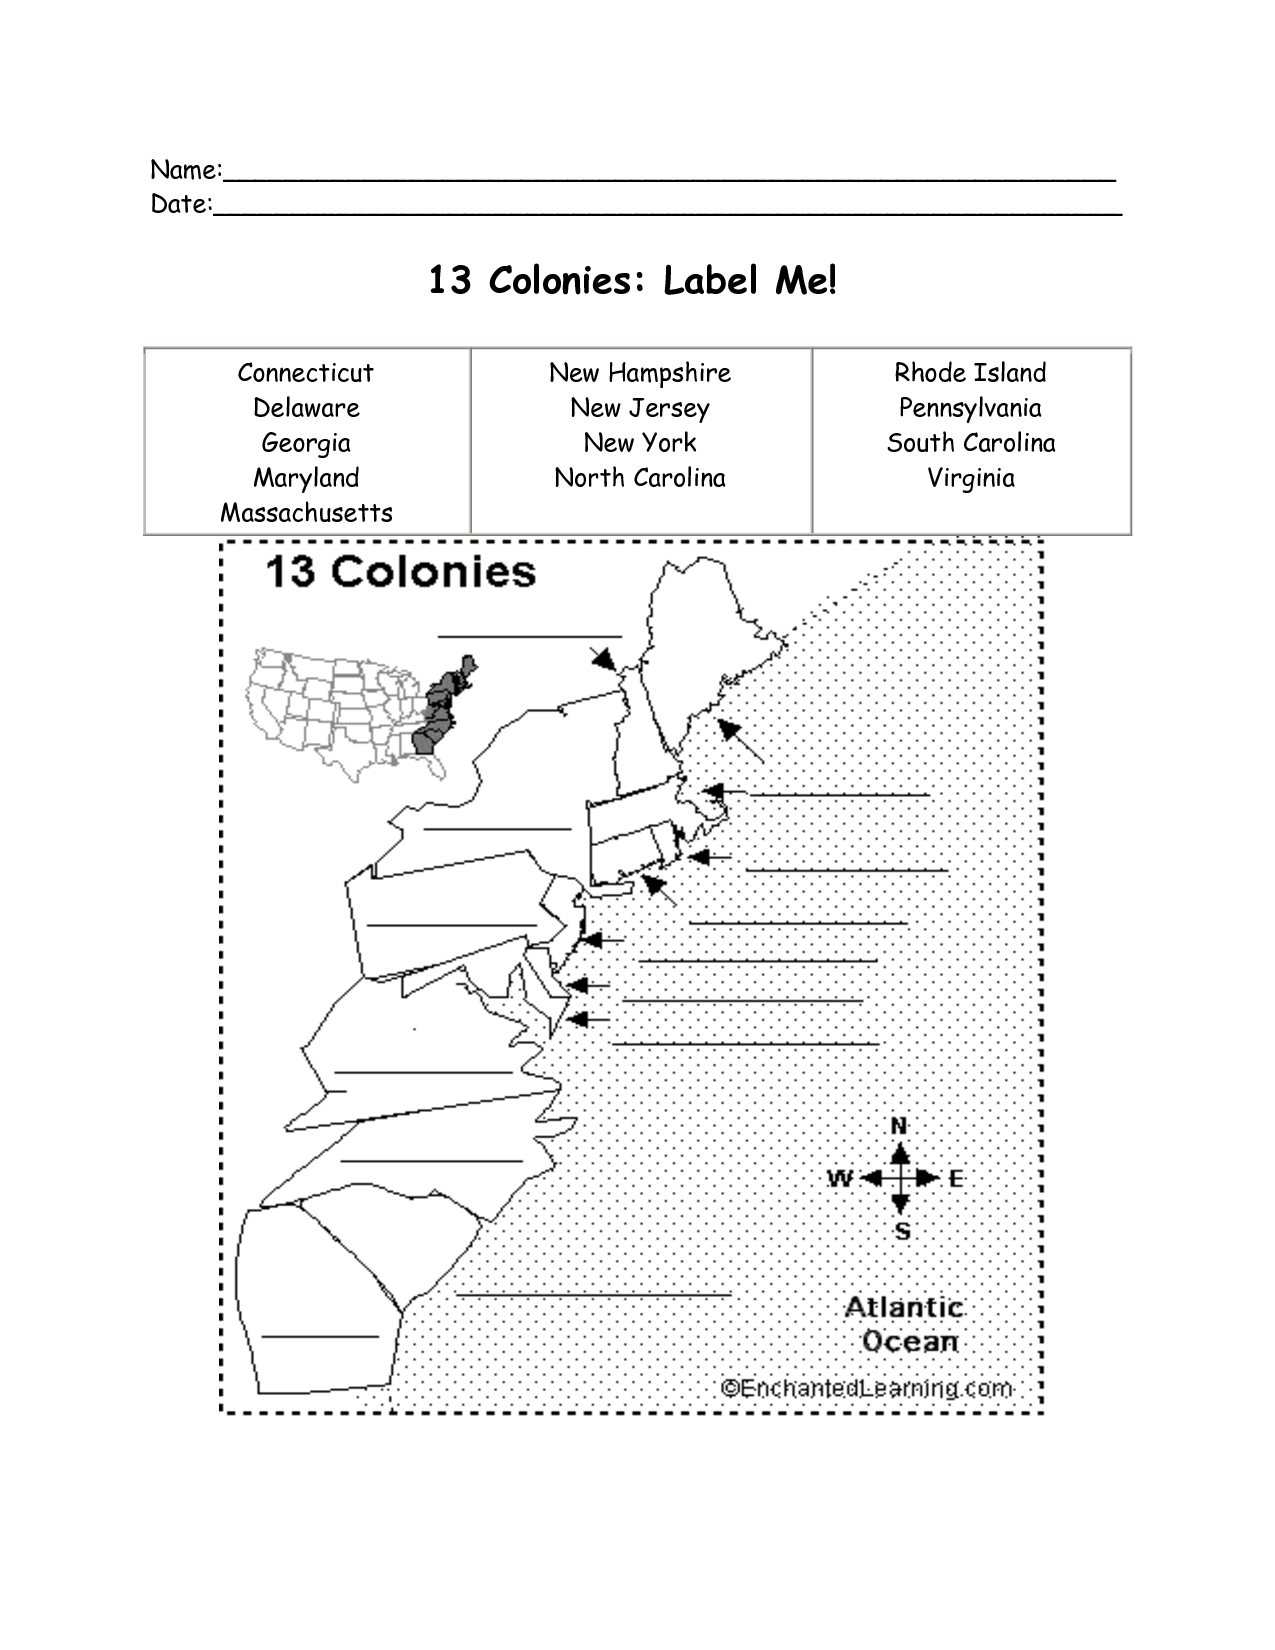 13-colonies-map-worksheet-answers